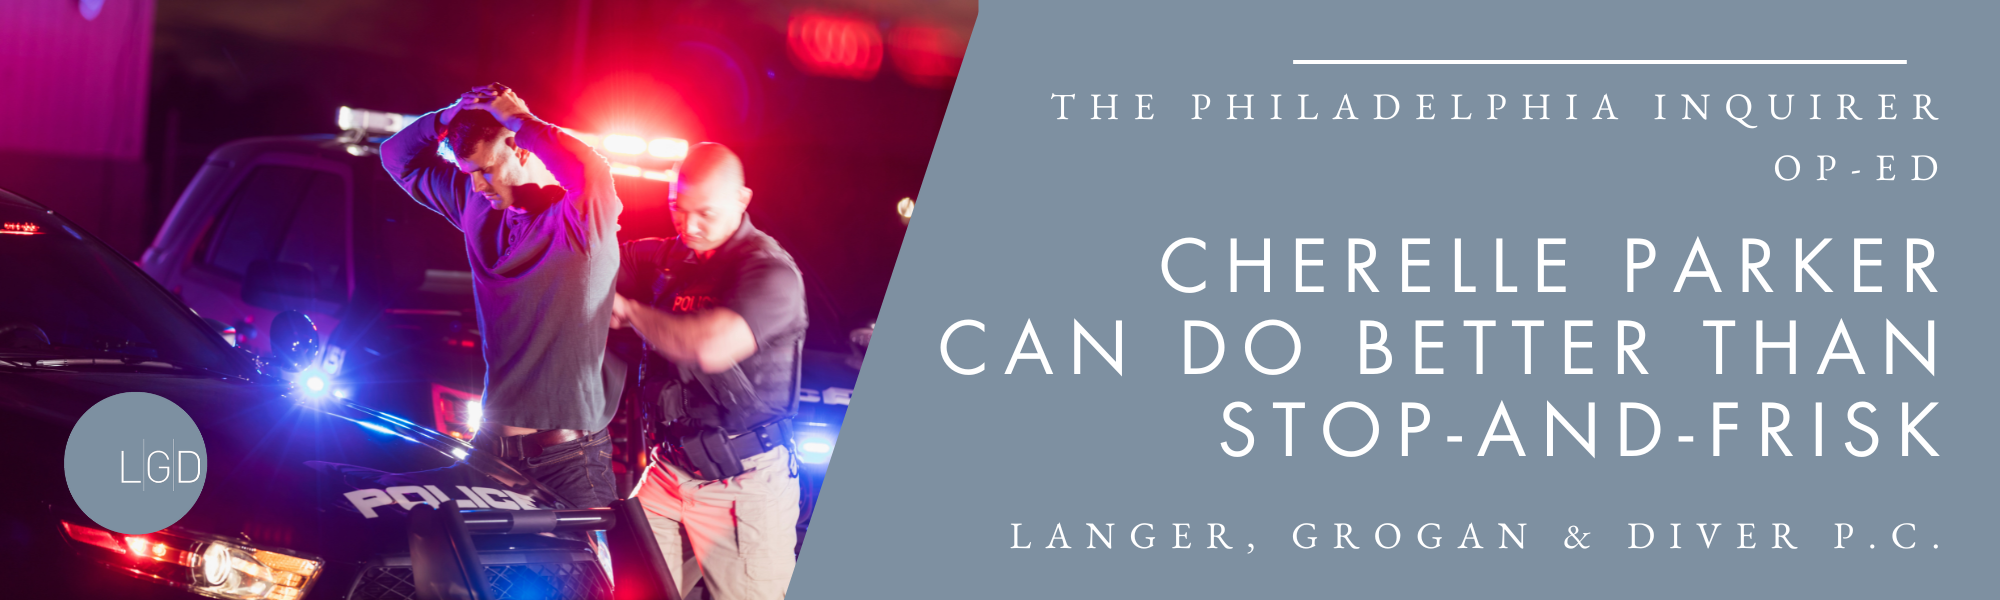 Decorative banner with image of police officer searching citizen and title text that reads: The Philadelphia Inquirer Op-Ed Cherelle Parker can do better than stop-and-frisk